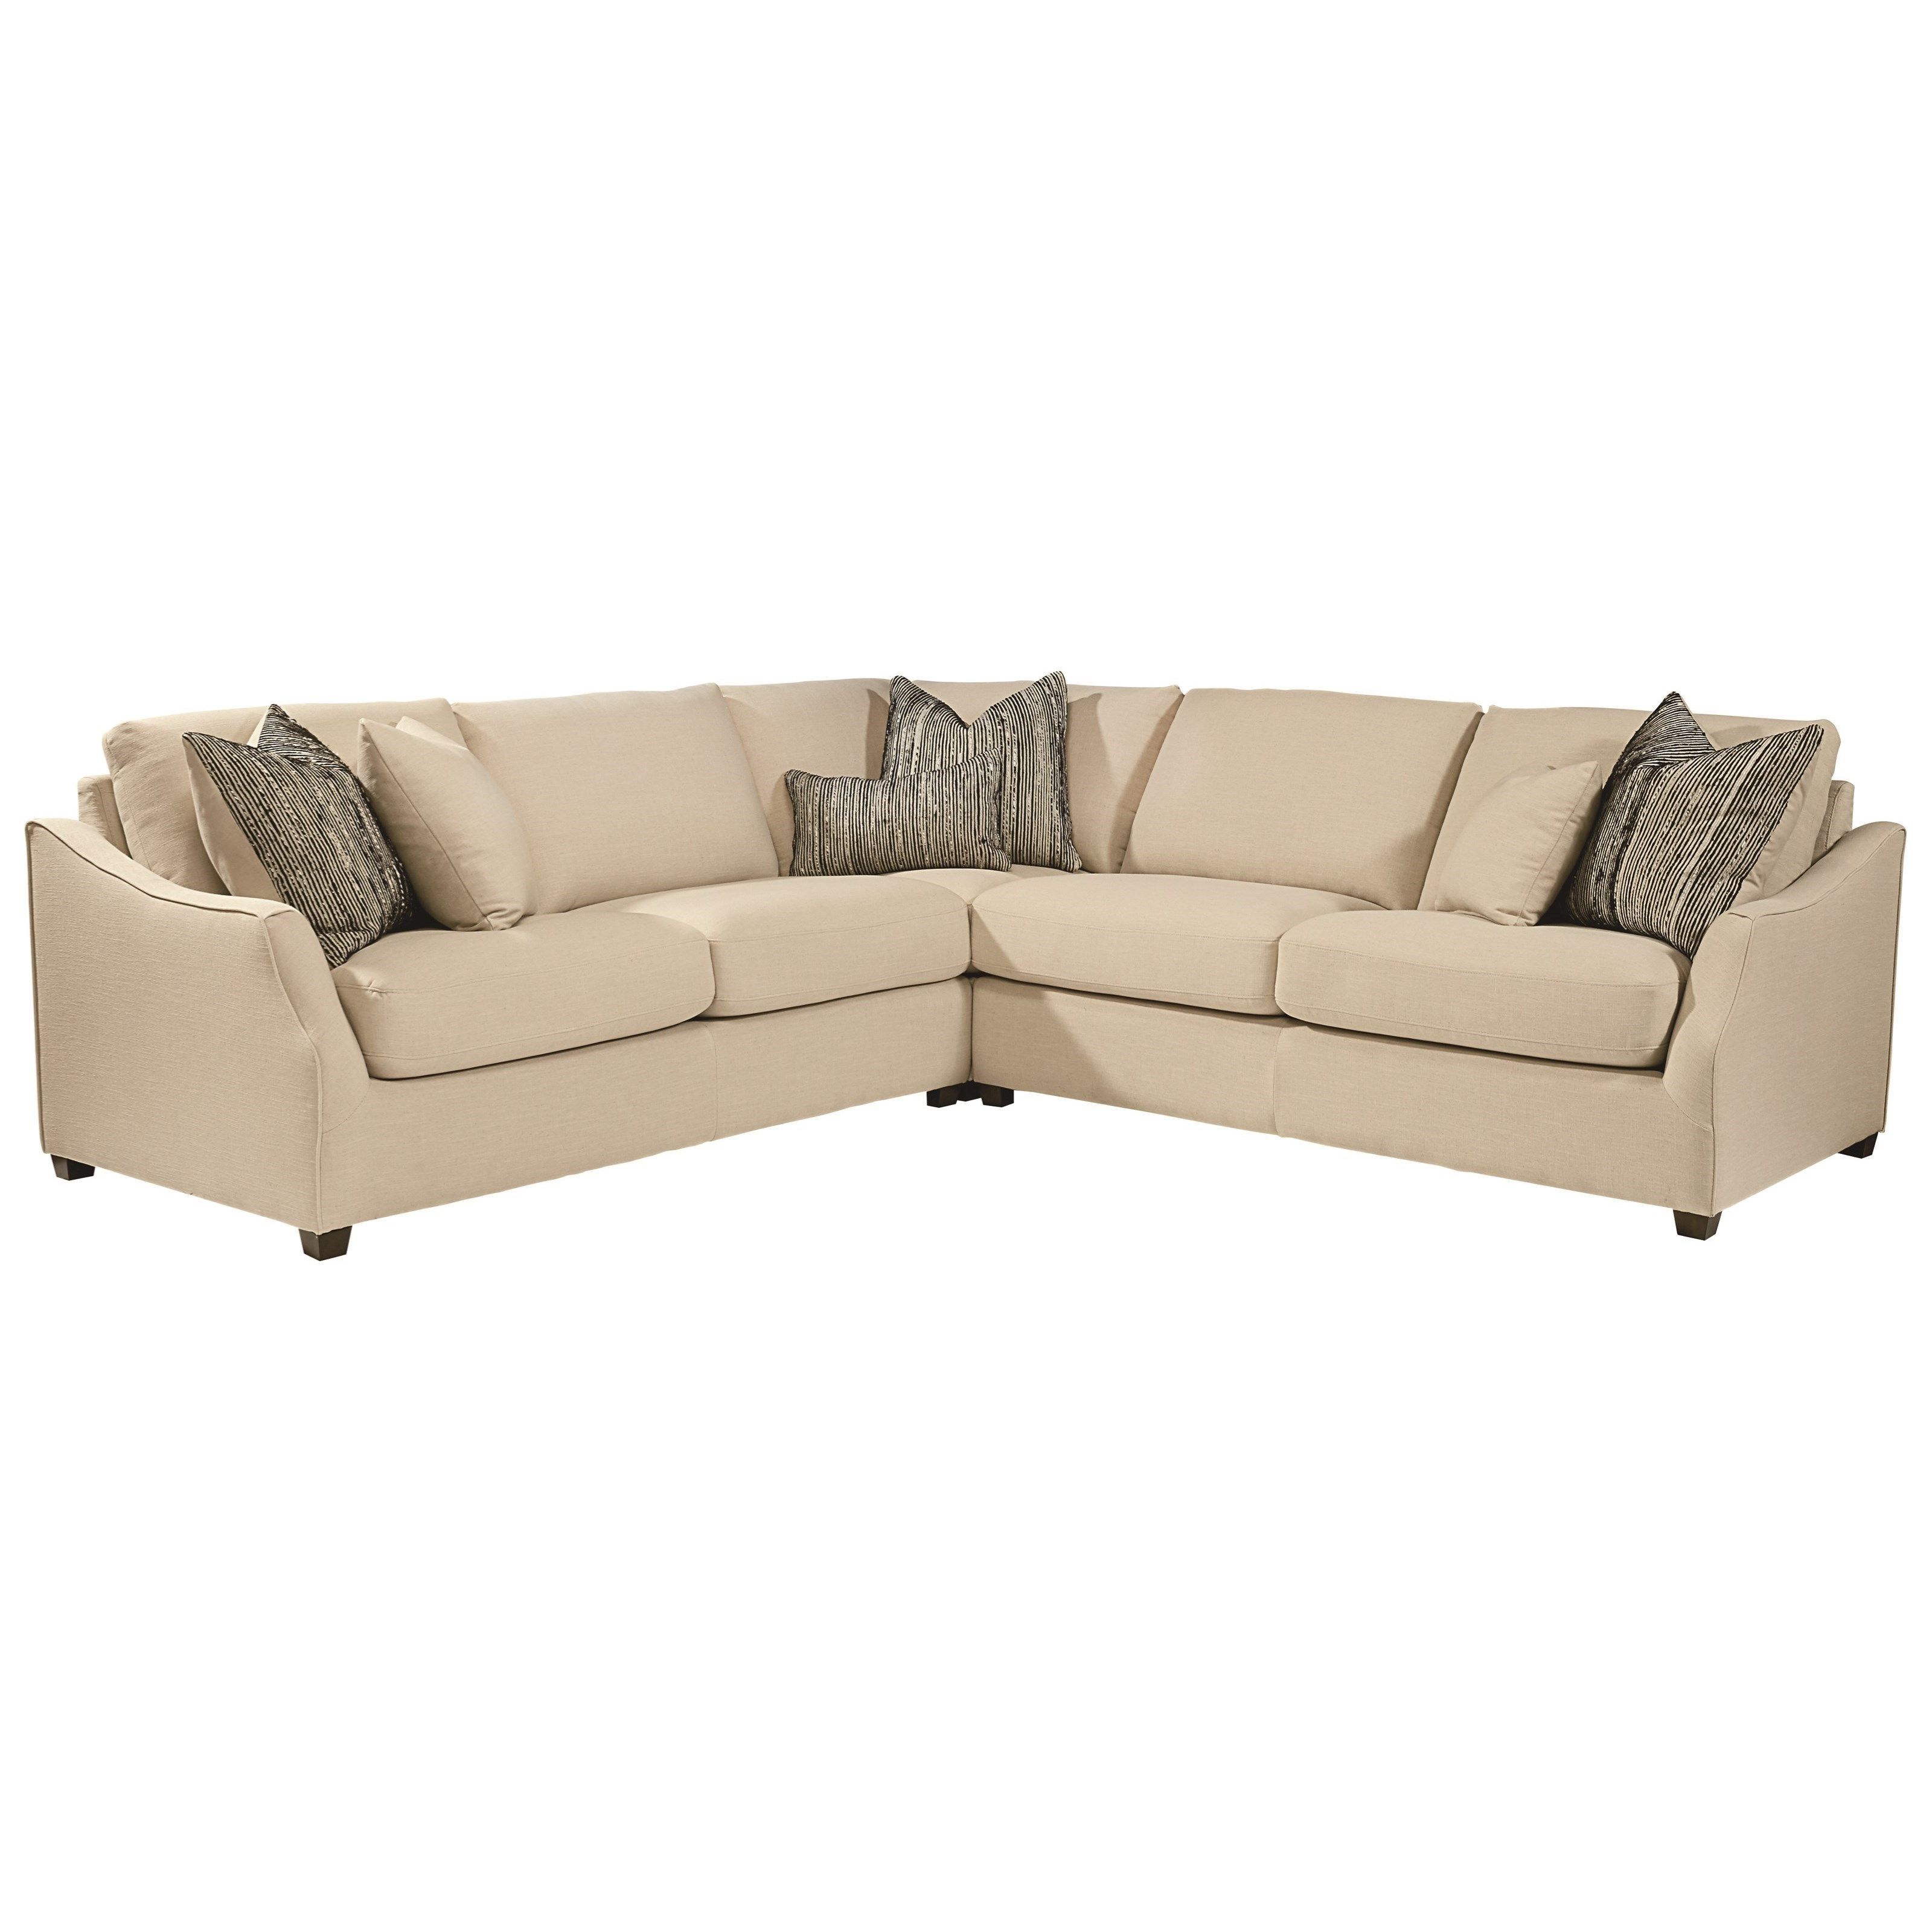 Magnolia Homejoanna Gaines Homestead Three Piece Sectional Throughout 2019 Raleigh Sectional Sofas (View 5 of 20)